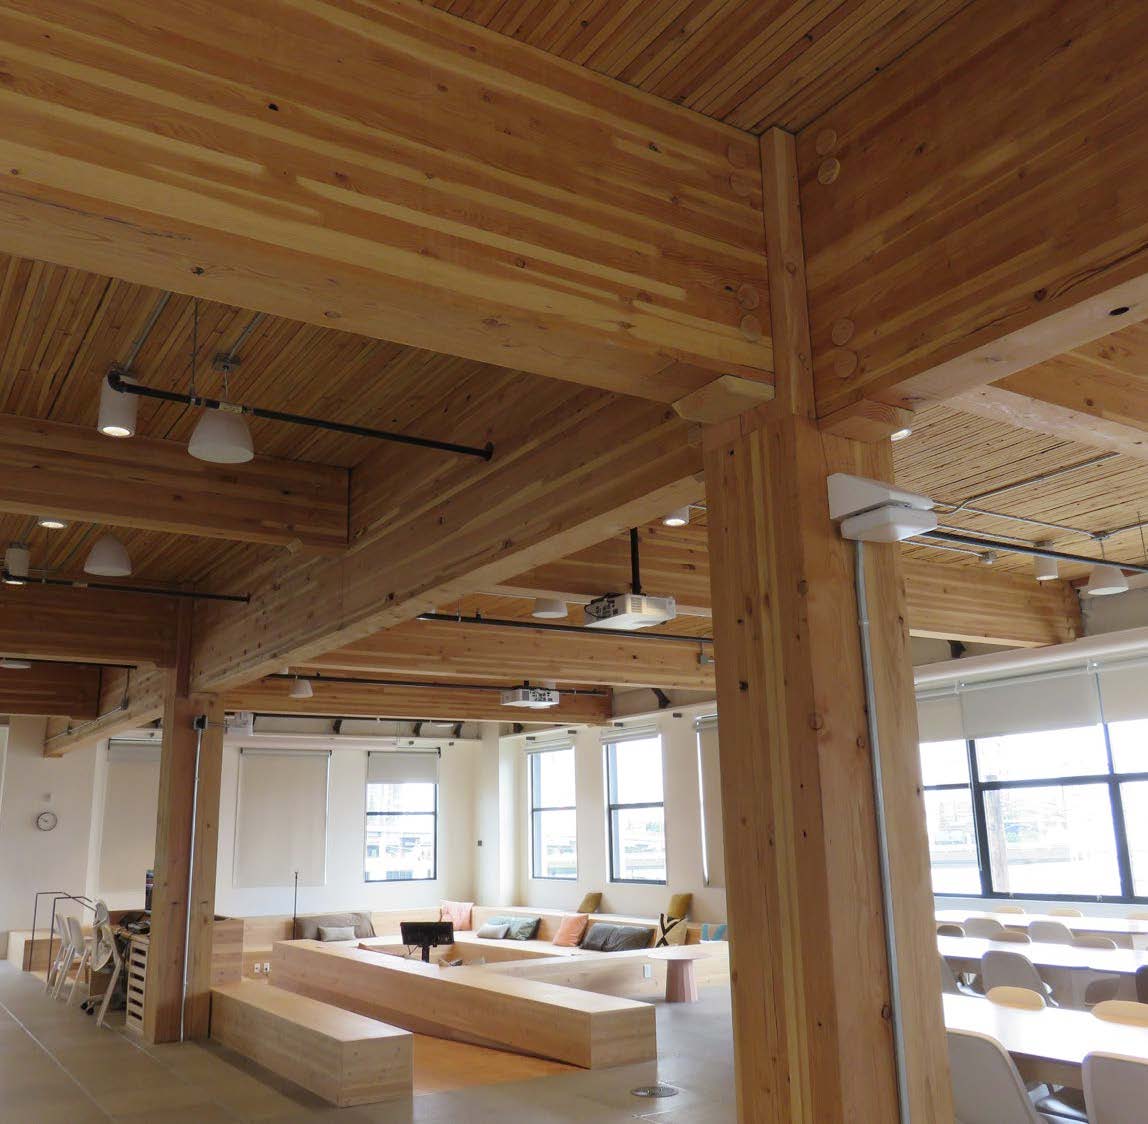 An Introduction to Mass Timber Buildings in the IBC